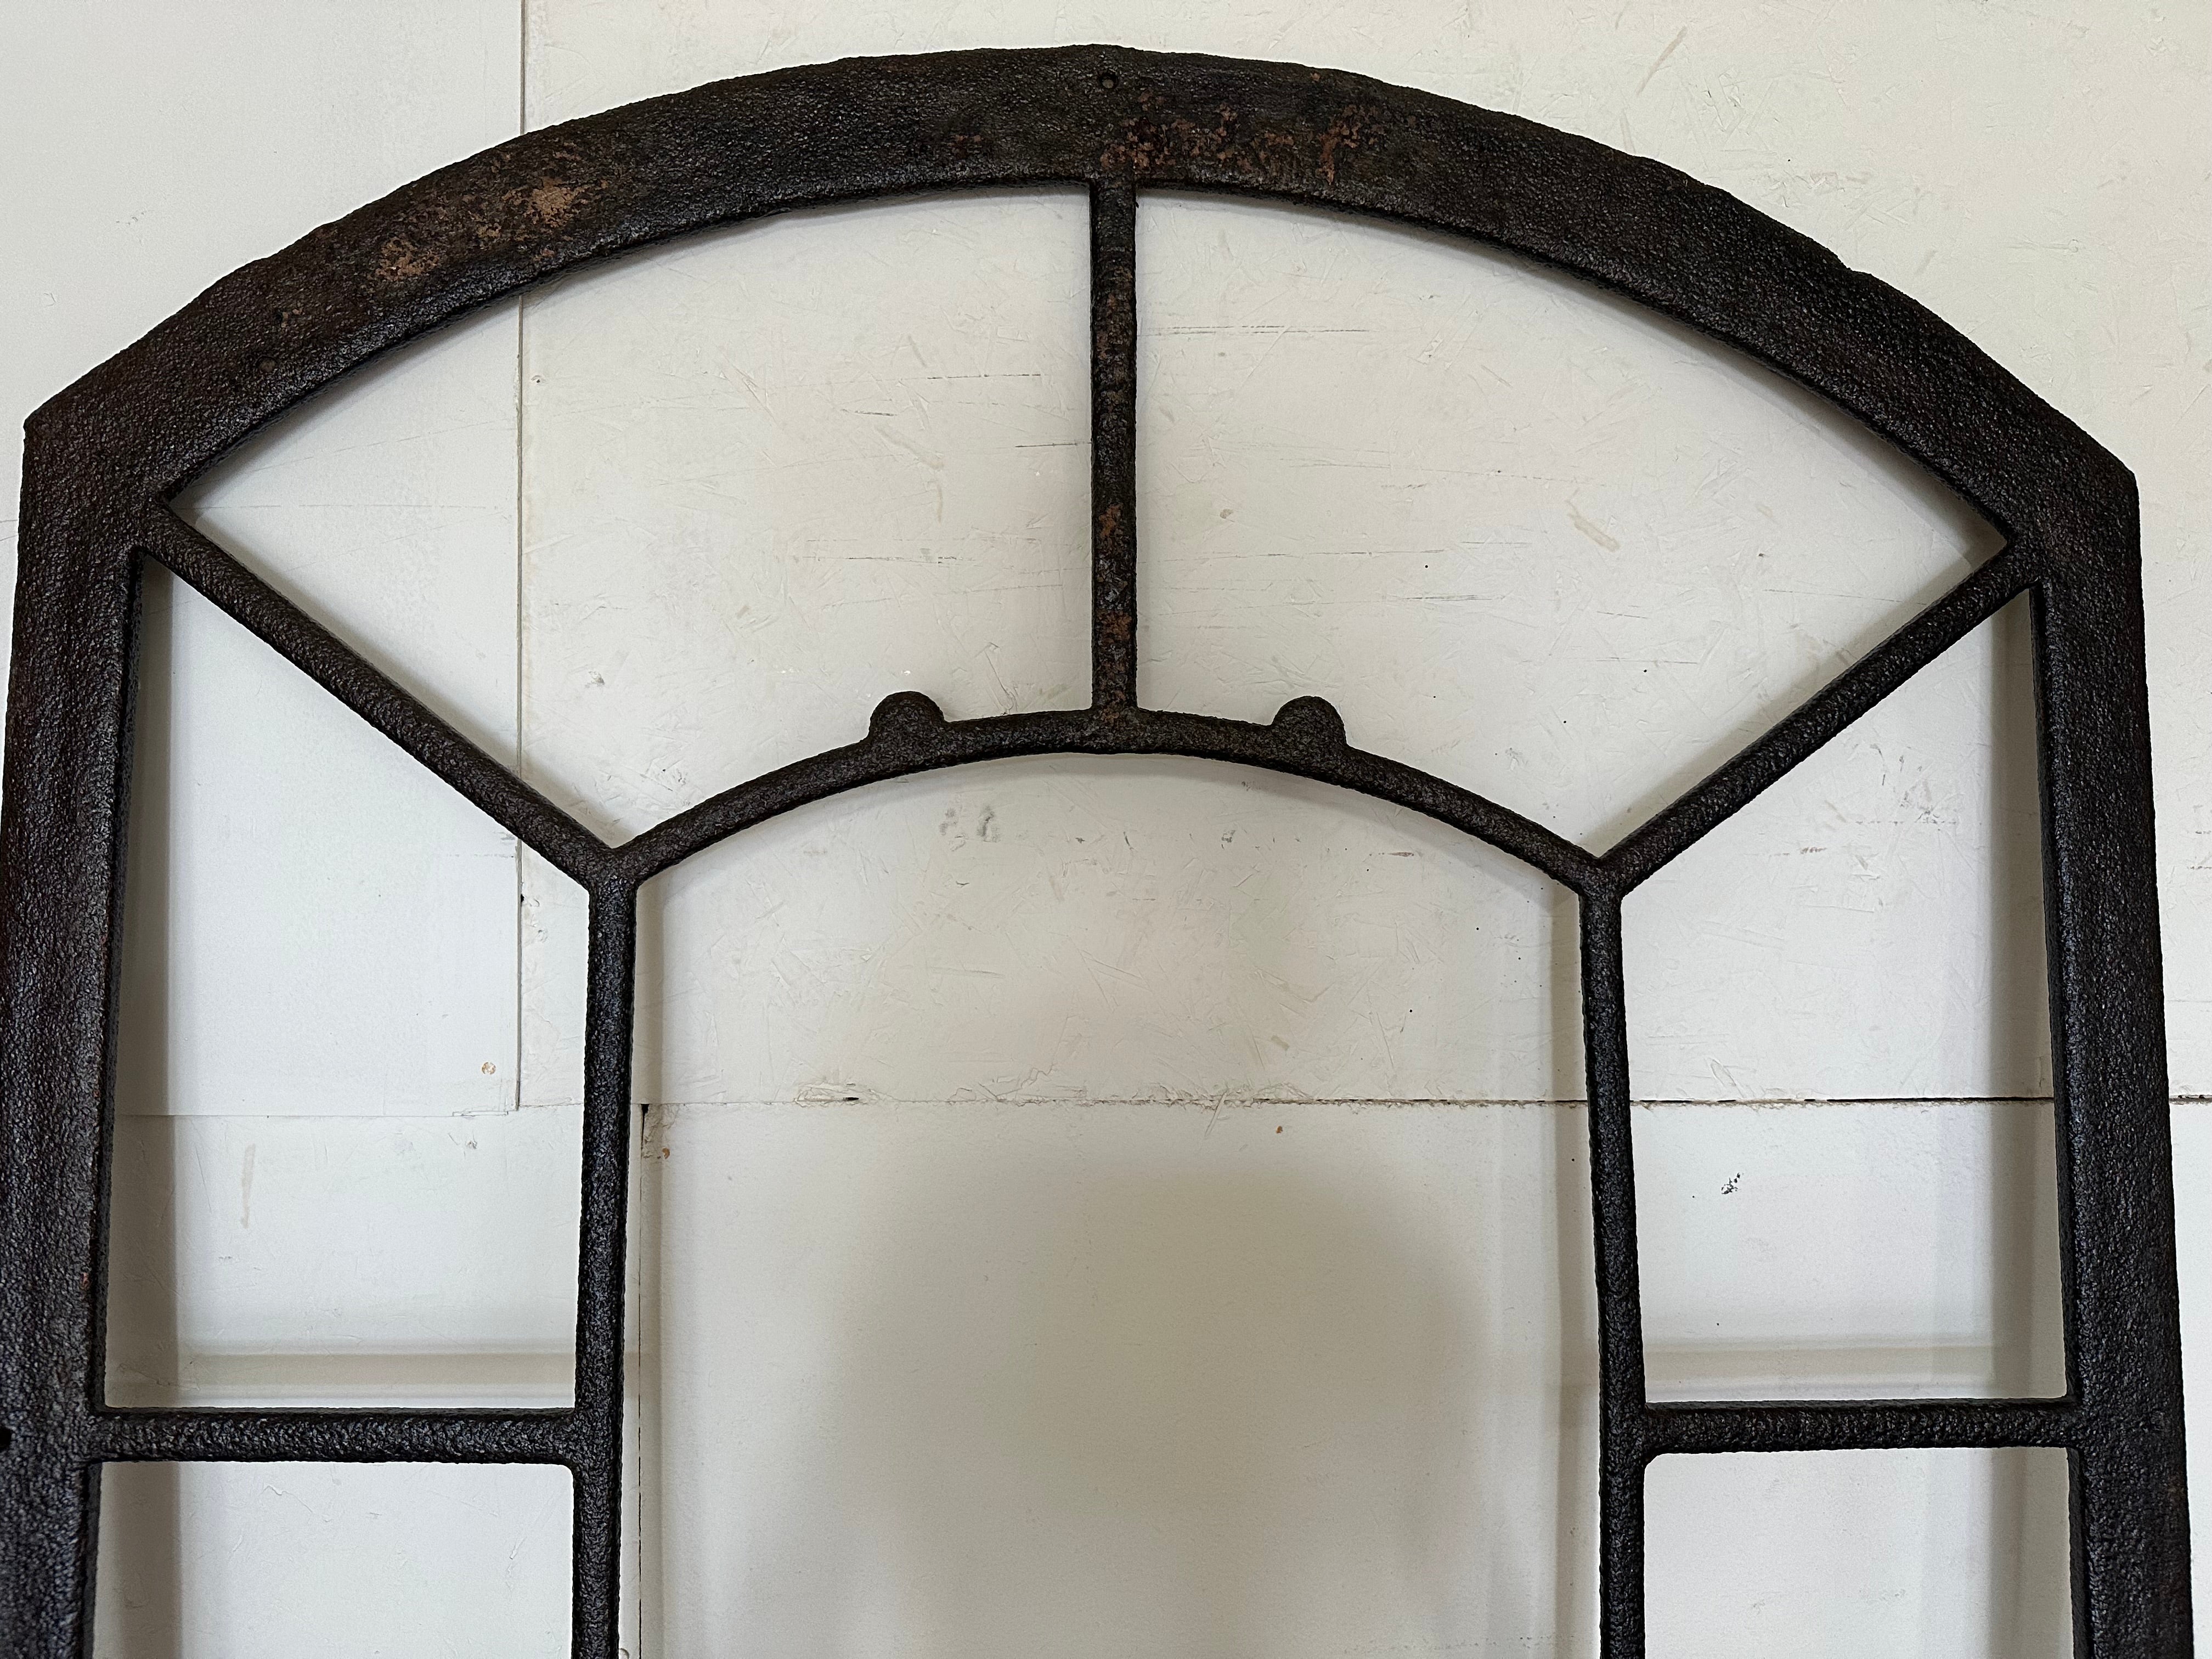 An elegant antique Neo-classic Tuilleries Orangerie window frame or wall mirror mirror frame with arched top made of hand crafted cast iron antique frame that once was a window from a French chateau.
Insert with mirror panels of your choice to